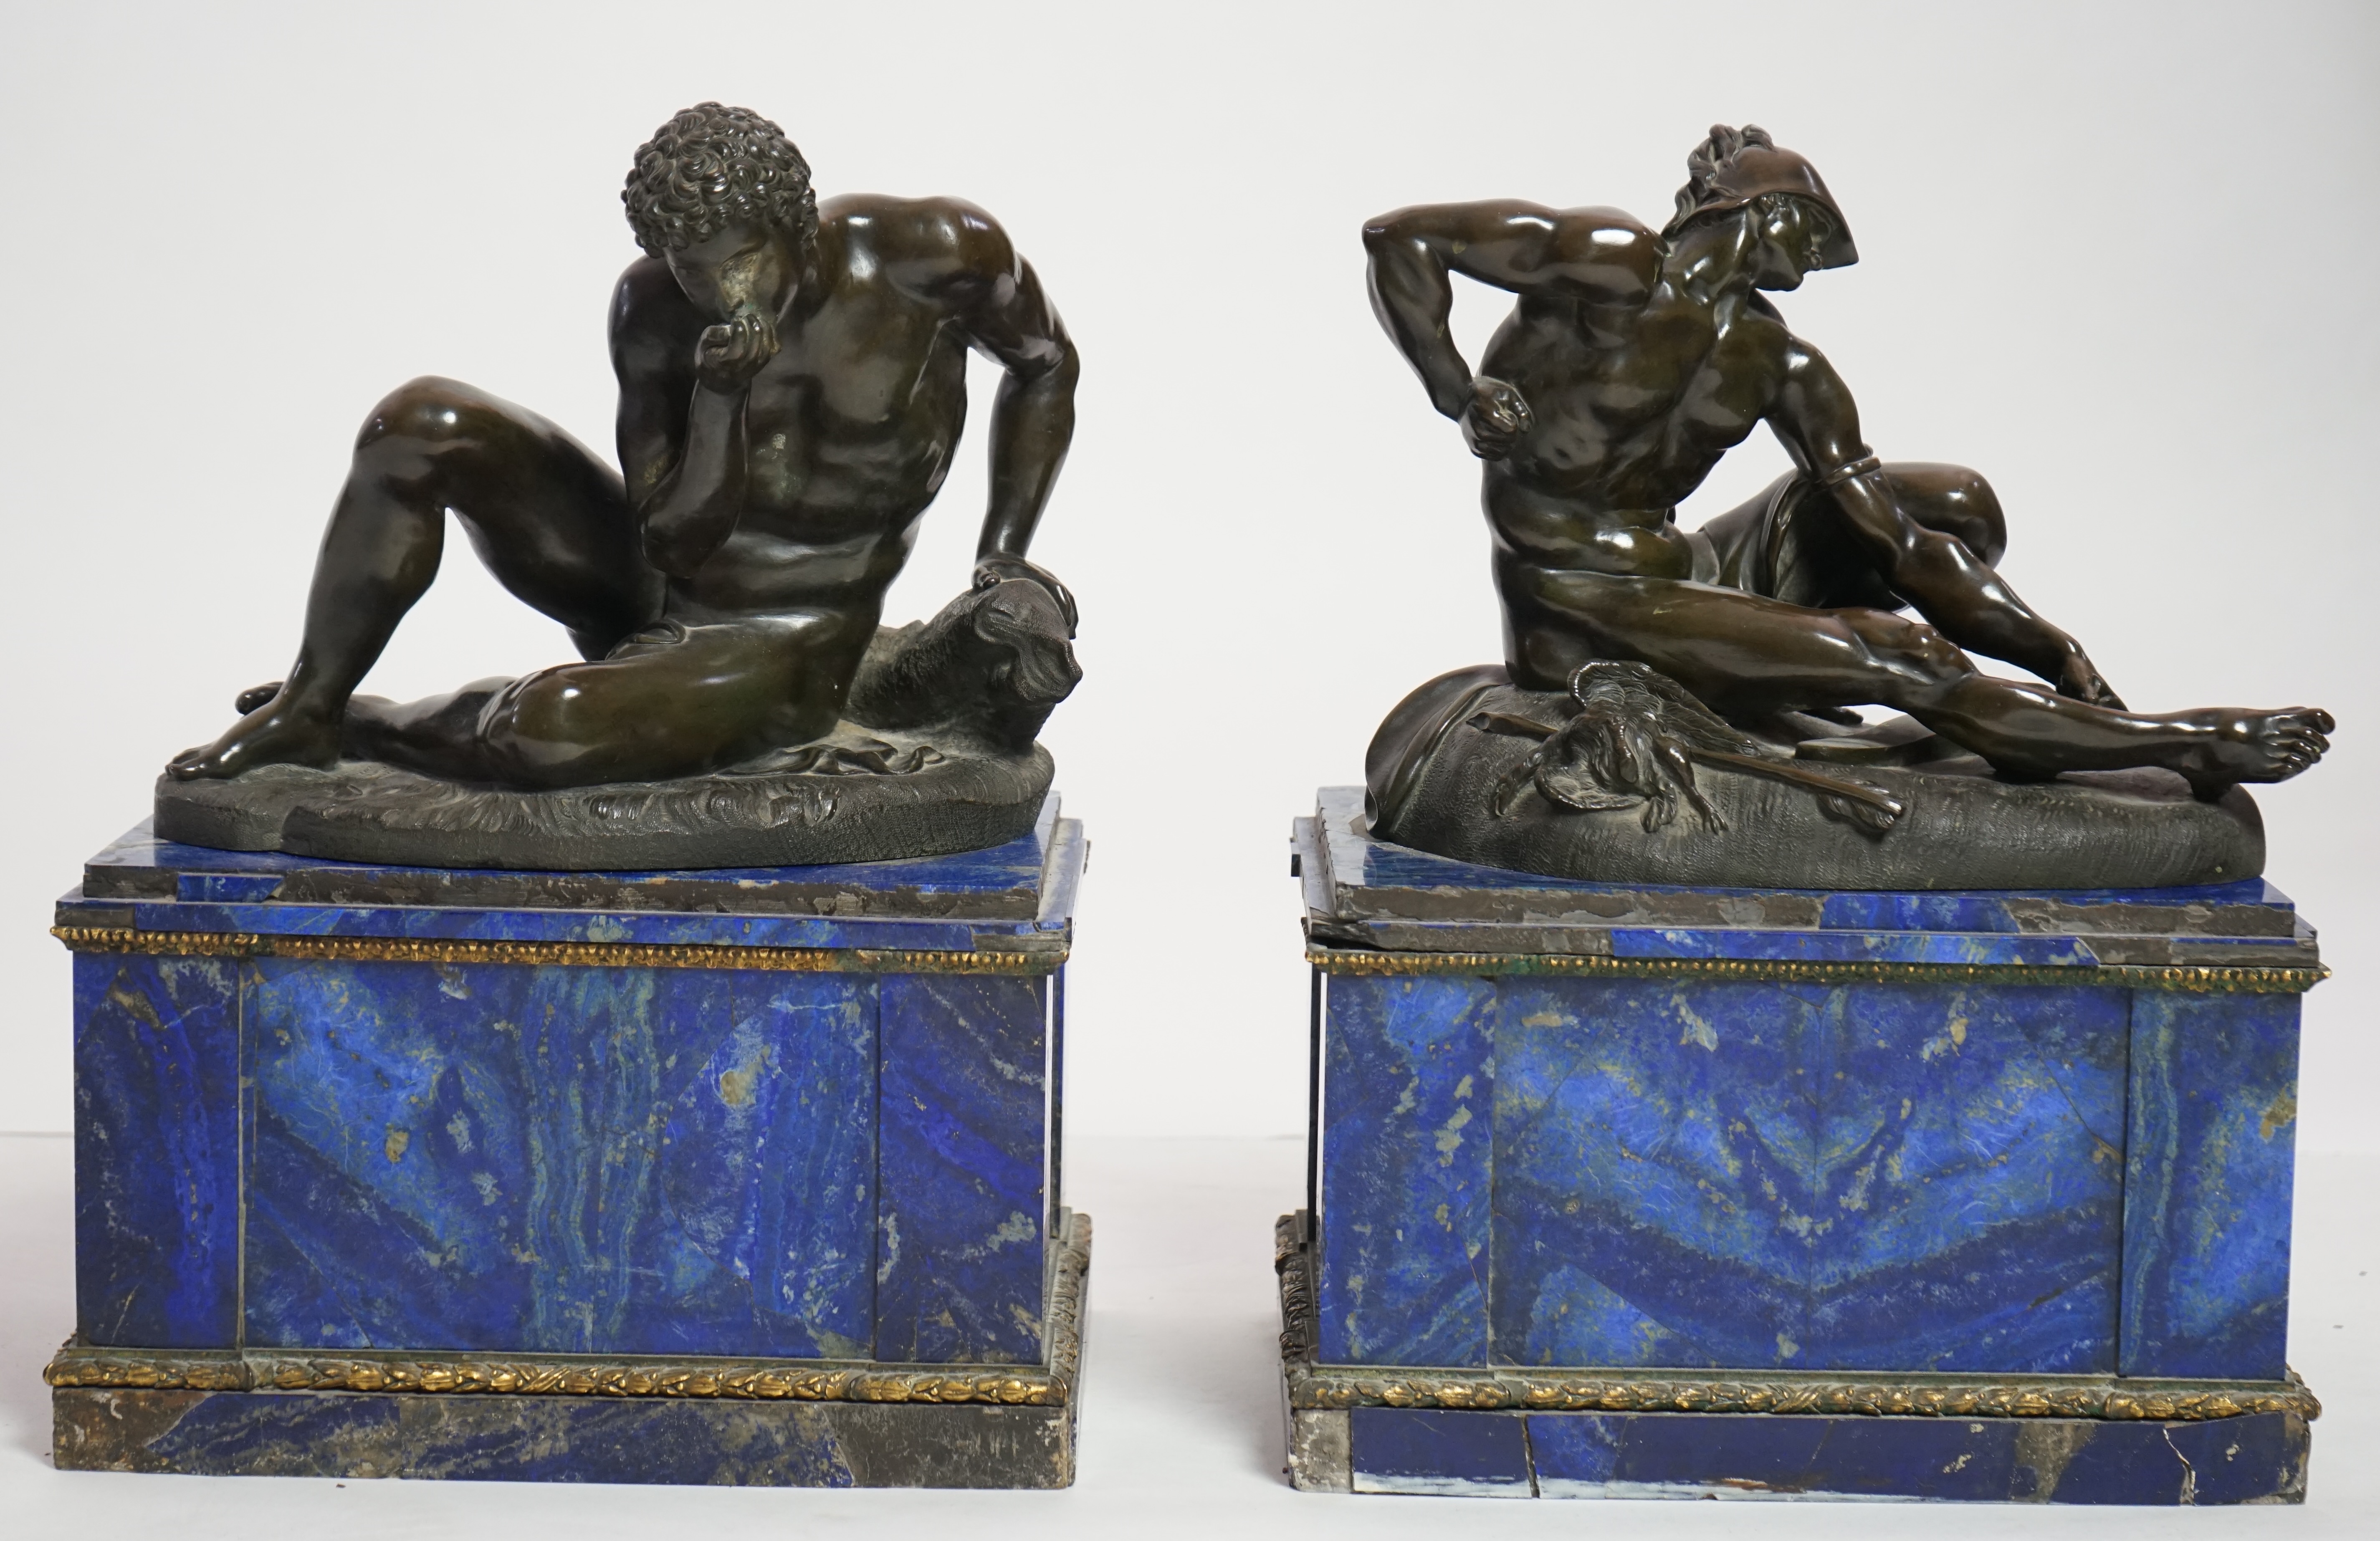 After the antique, a pair of late 18th/early 19th century Grand Tour souvenir bronze figures of seated warriors